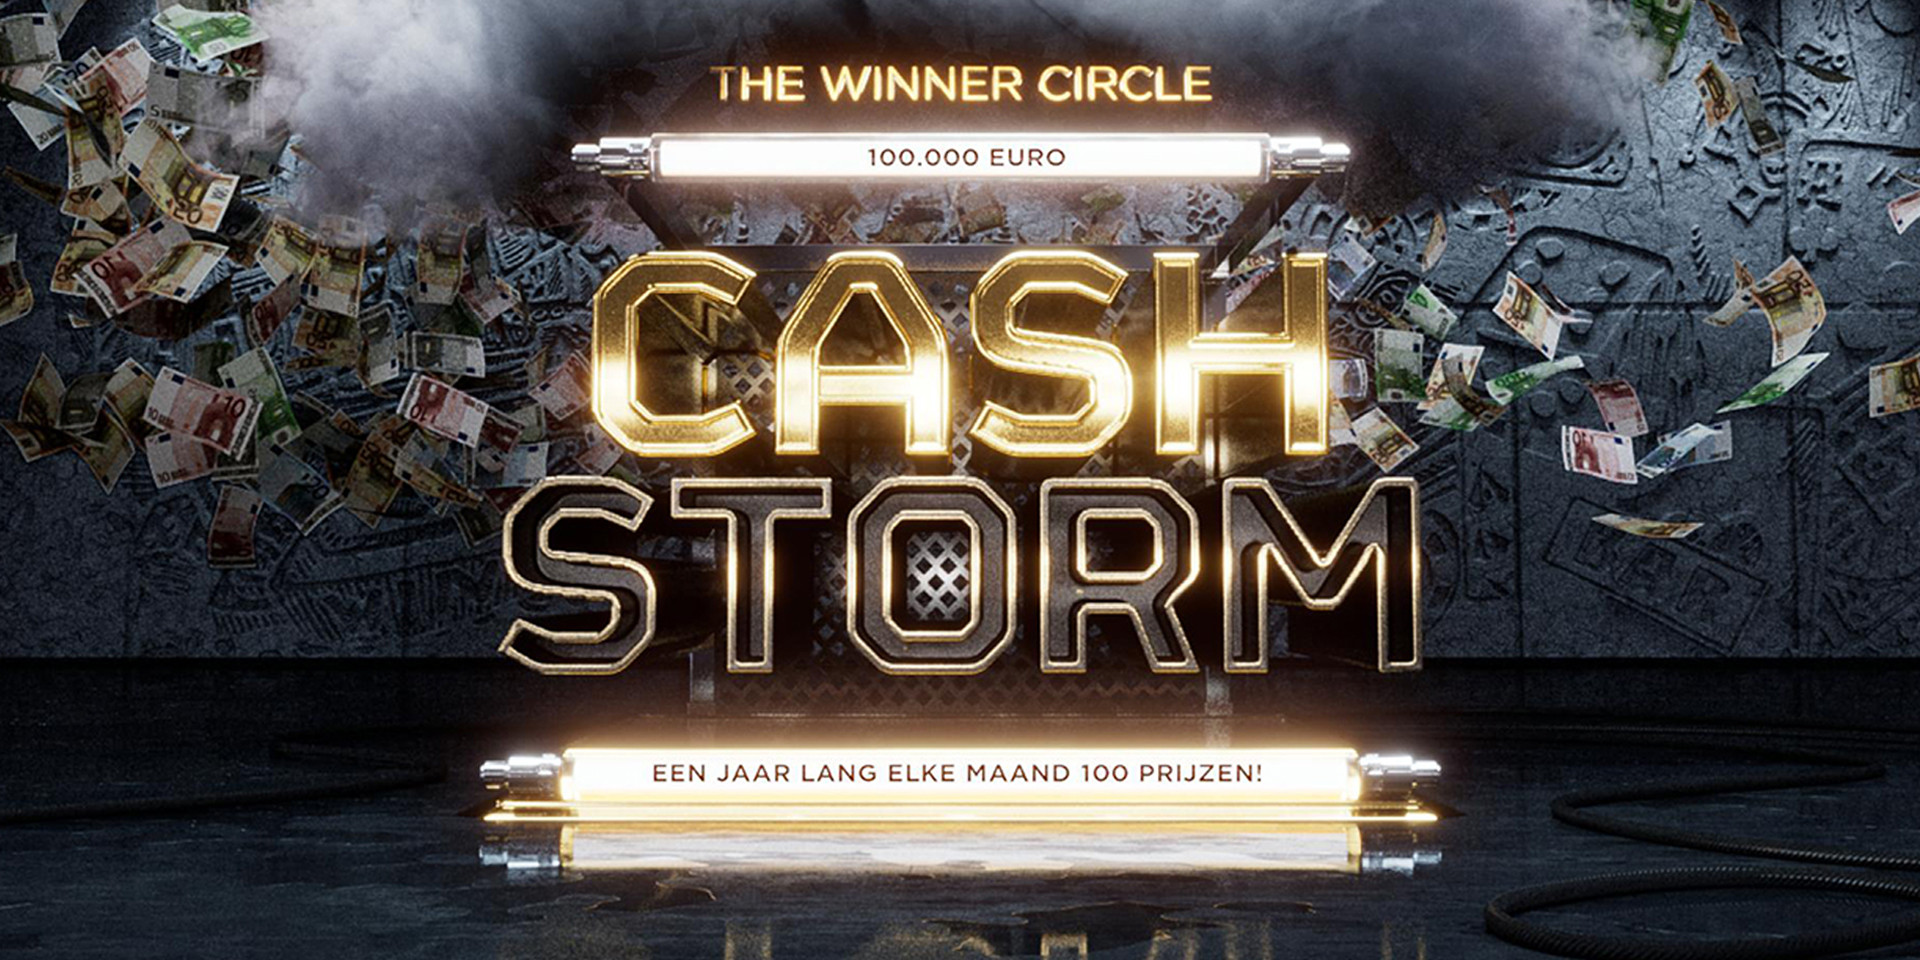 Will this cash storm blow you away?